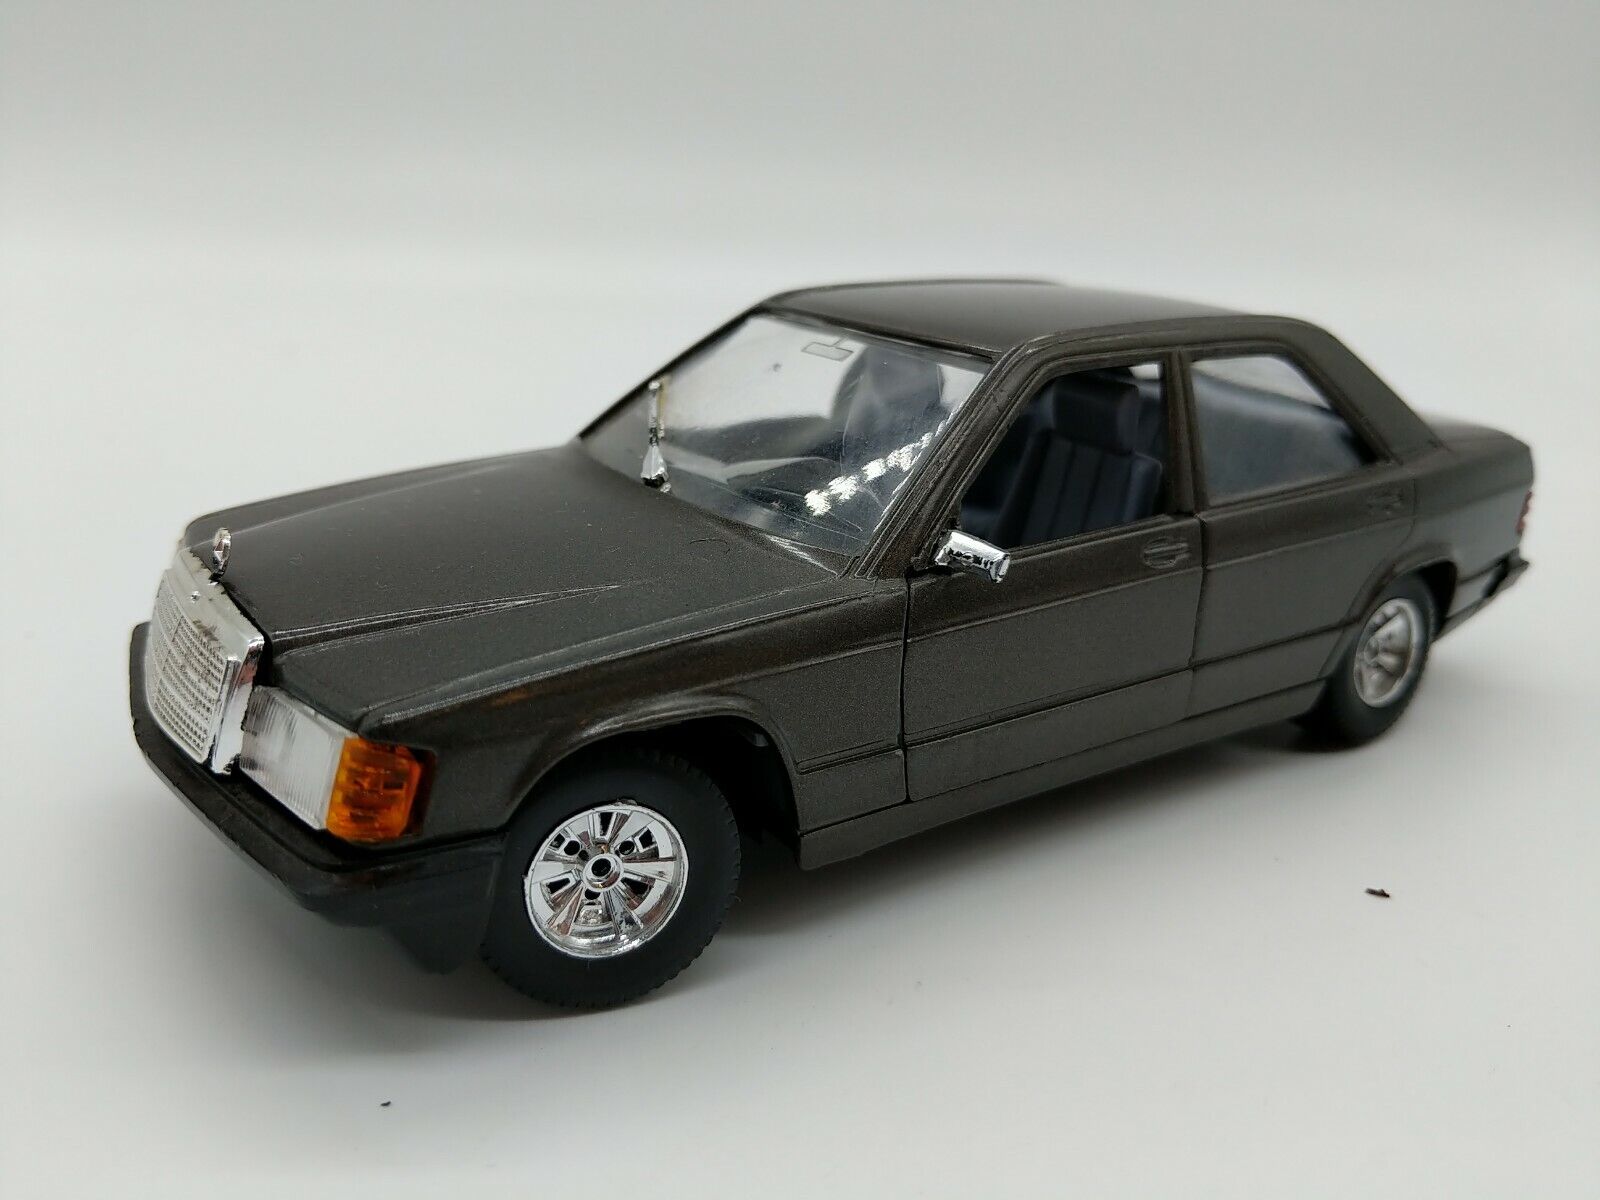 Burago Made in Italy Mercedes 190 E 1/25 Scale Die-Cast Toy Car Grey